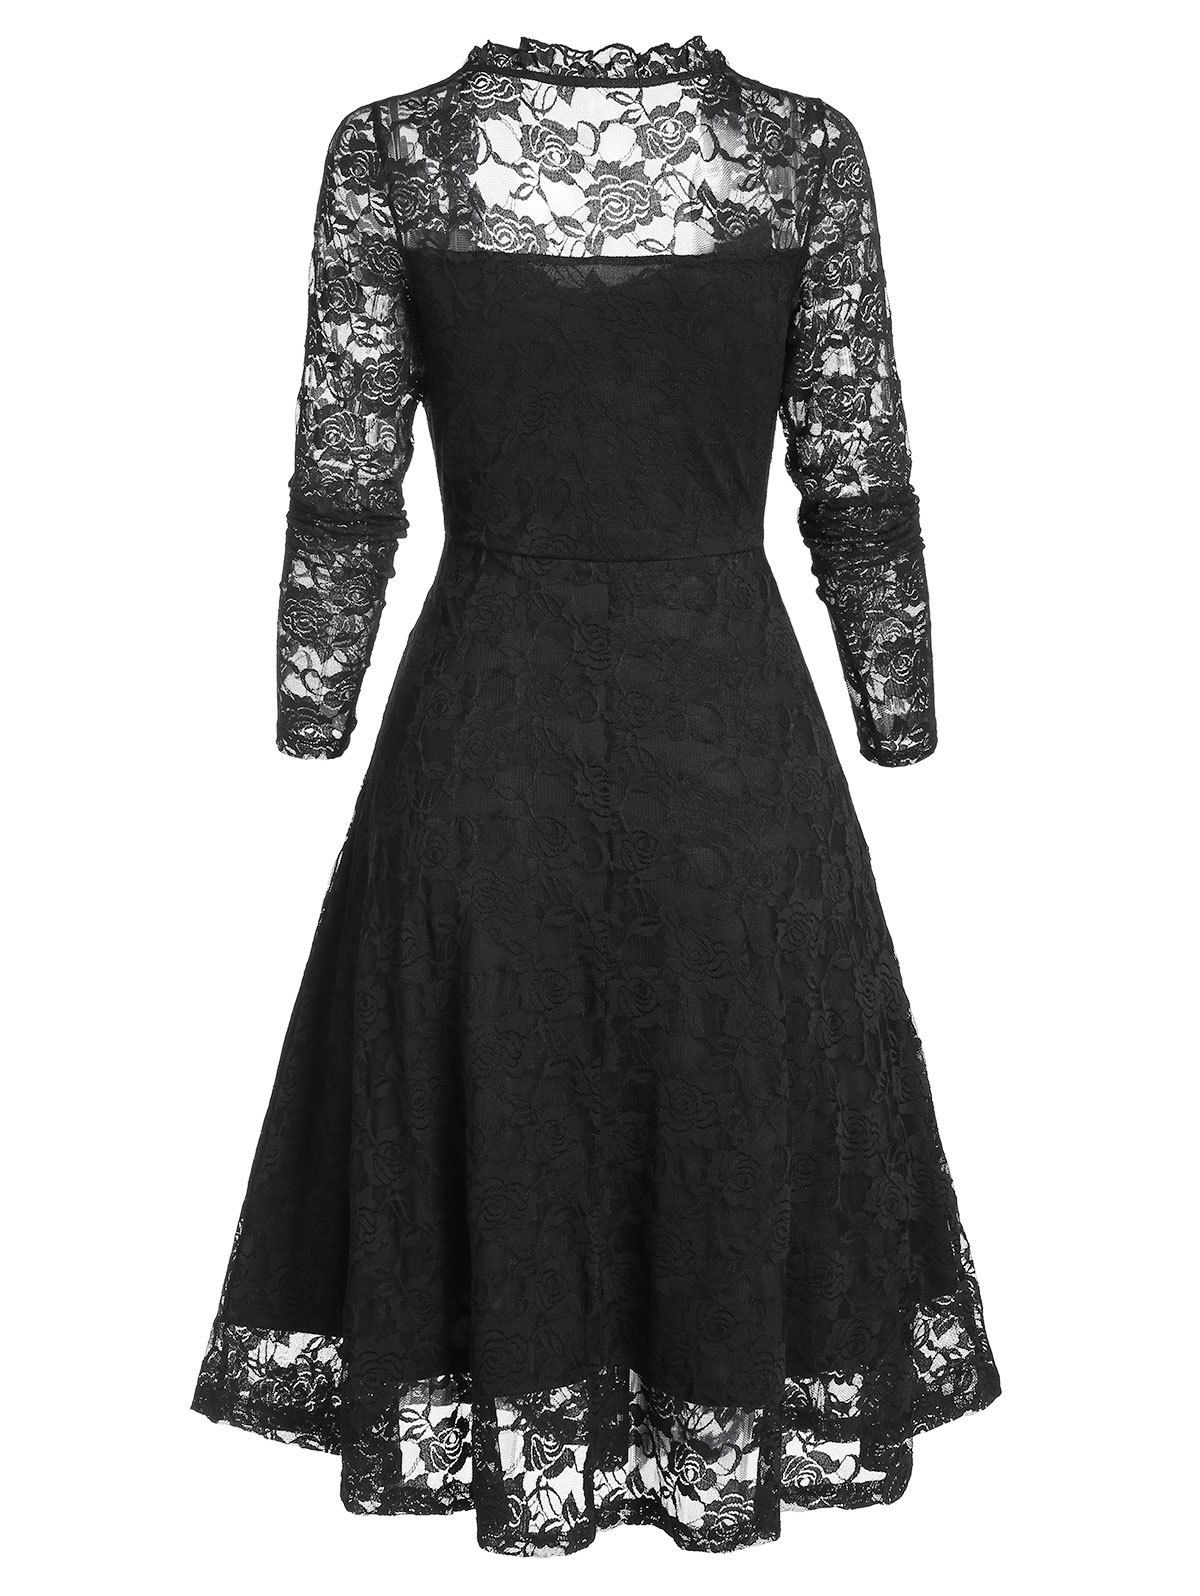 [27% OFF] 2021 Floral Lace Ruffle Queen Anne Collar Dress In BLACK ...